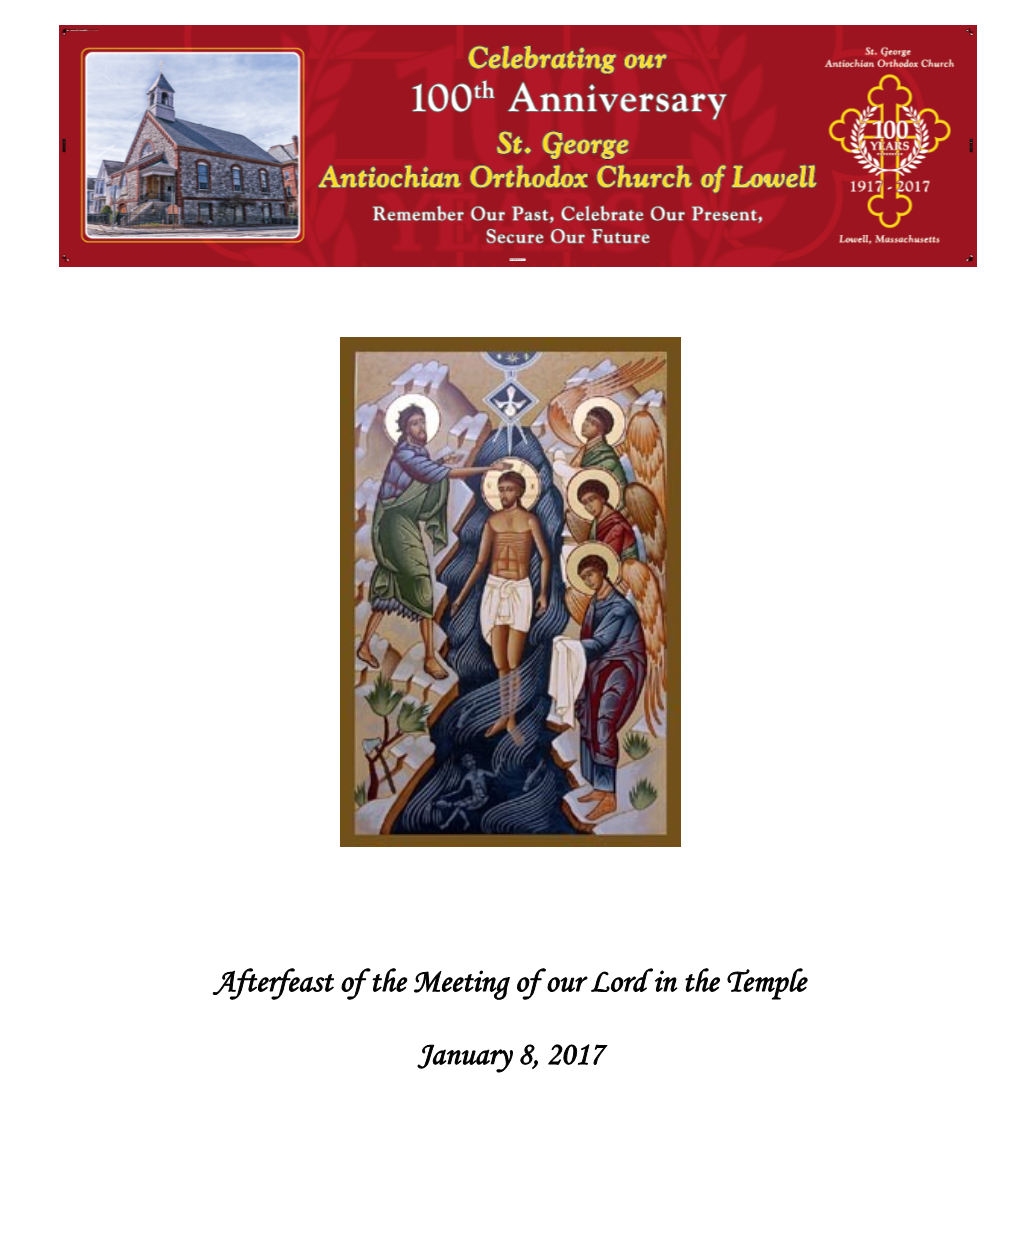 Afterfeast of the Meeting of Our Lord in the Temple January 8, 2017